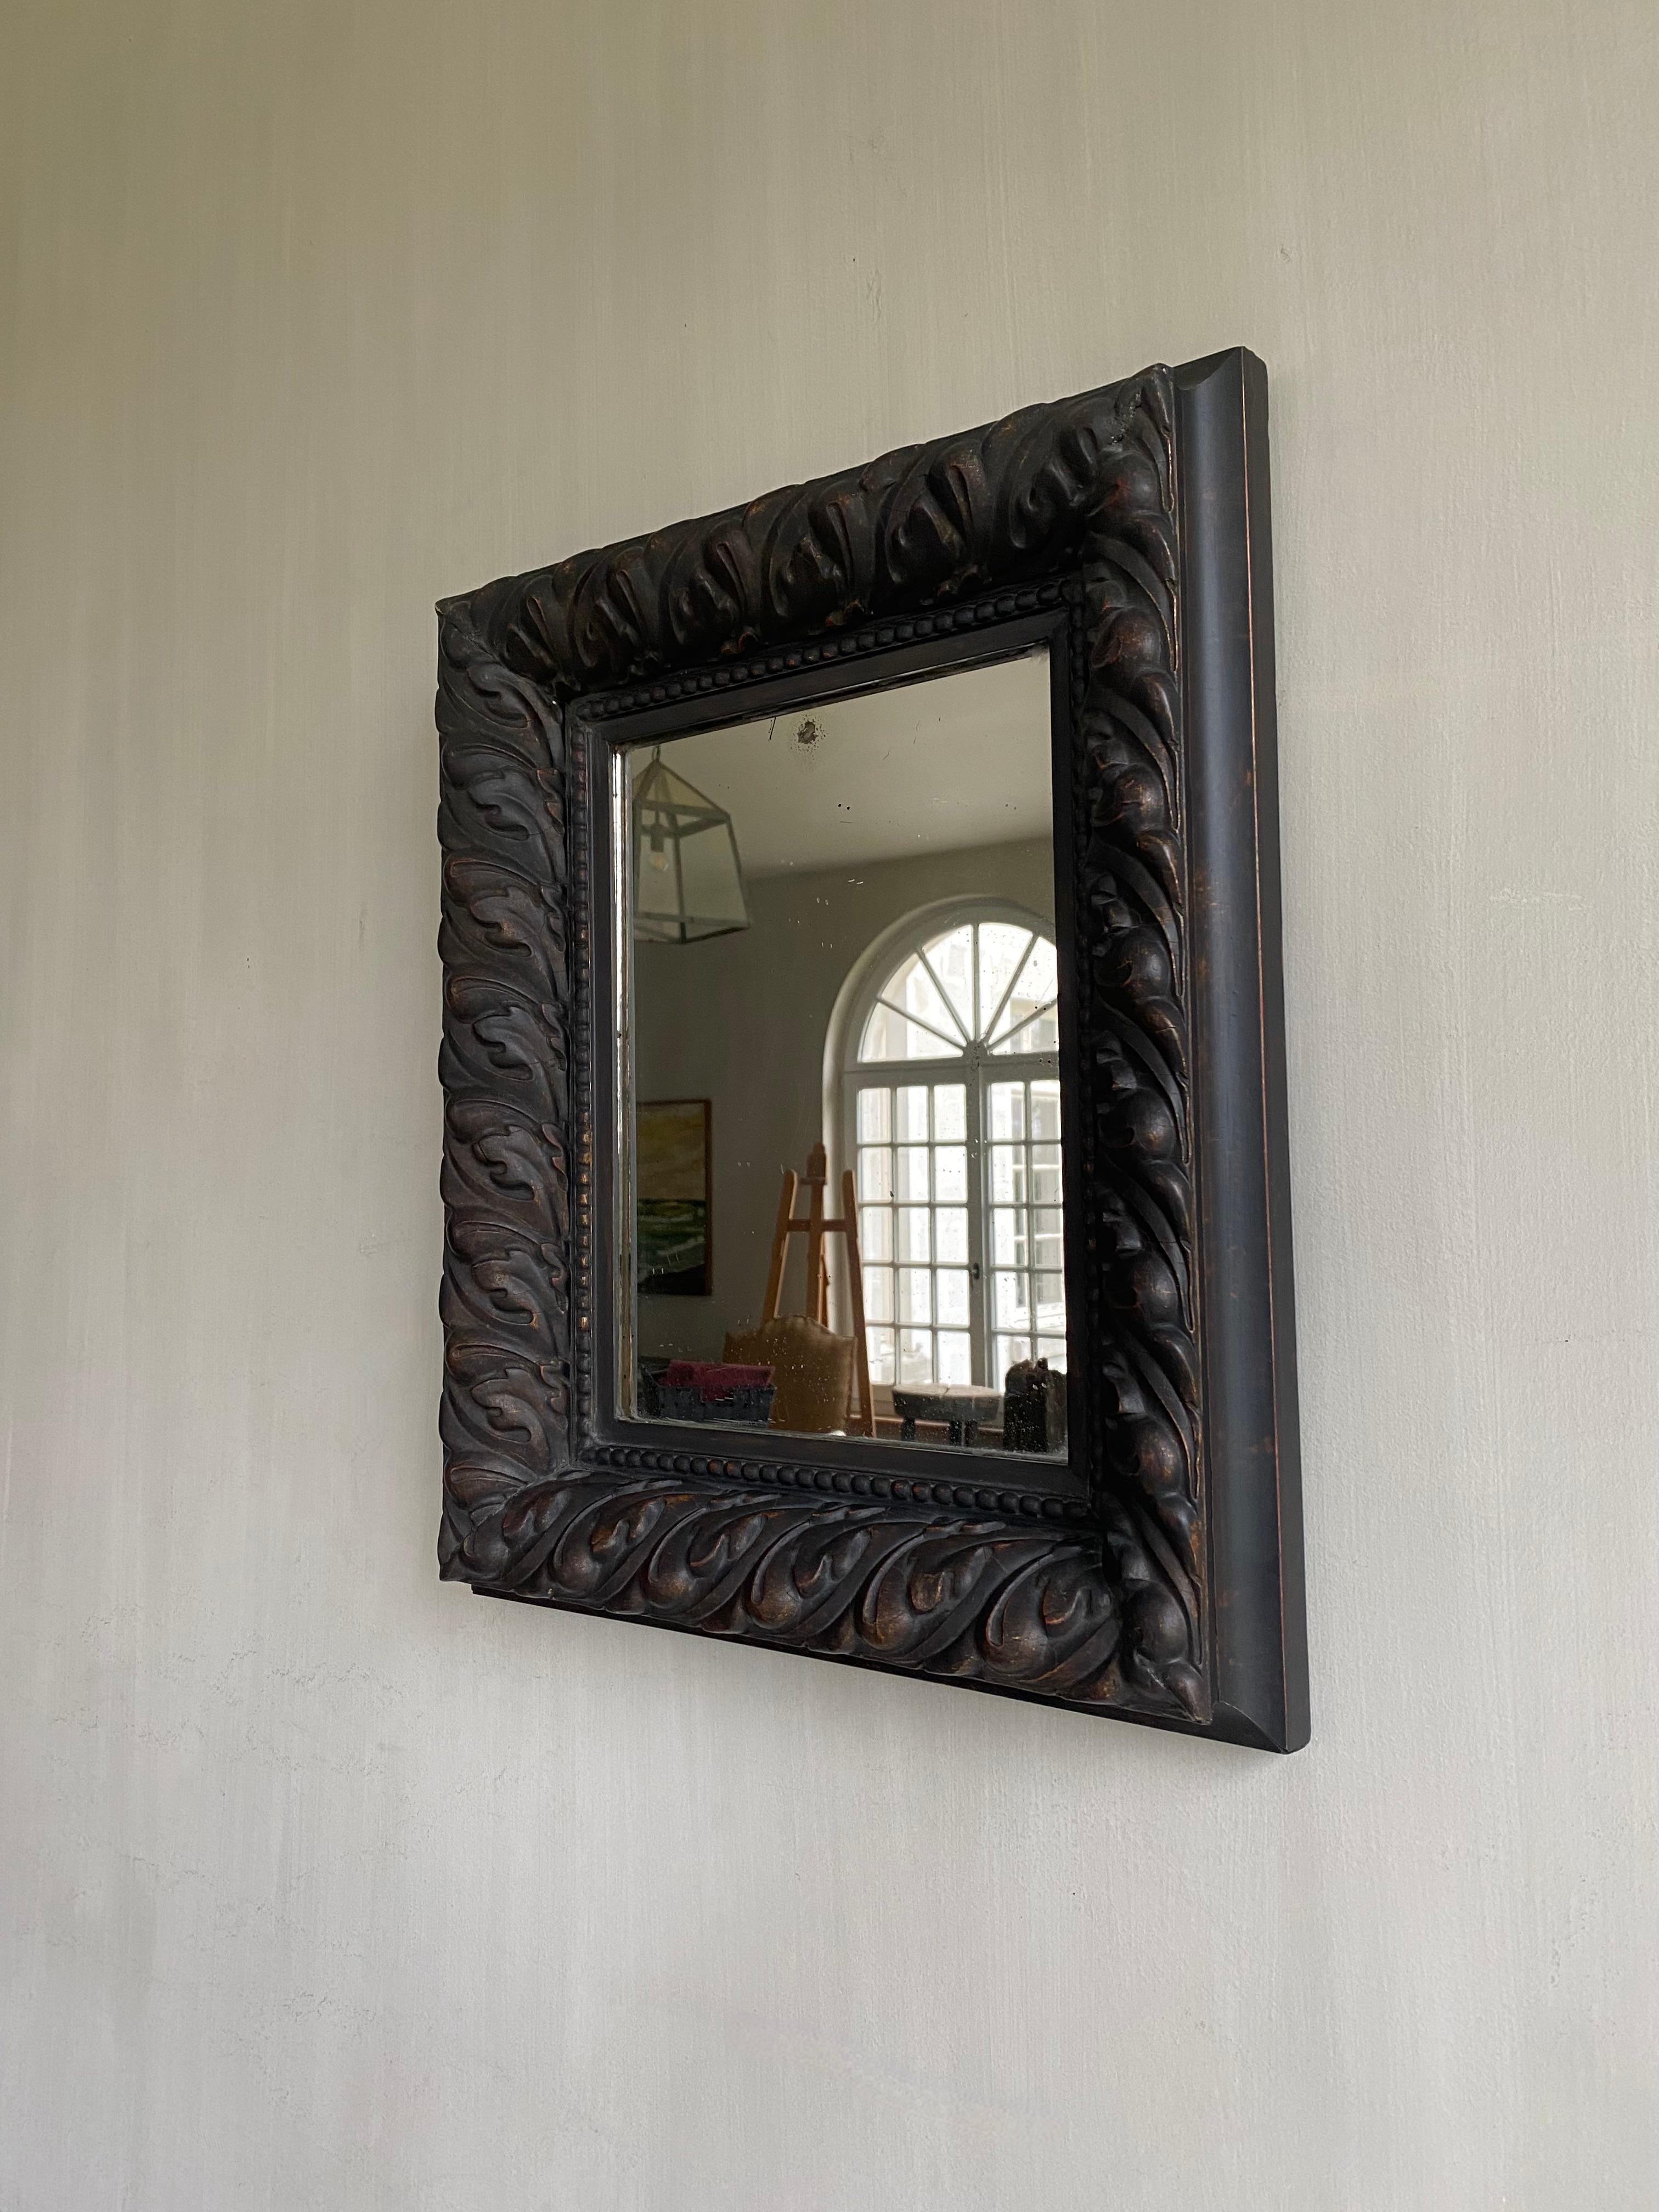 This beautiful mirror with a repetitive pattern of a lobed oak leaf has a calm and simplicity about it, despite the carvings present.
The wood is gilded and set in ebony on top.
The mirror glass has nice weathering at the back due to age. The